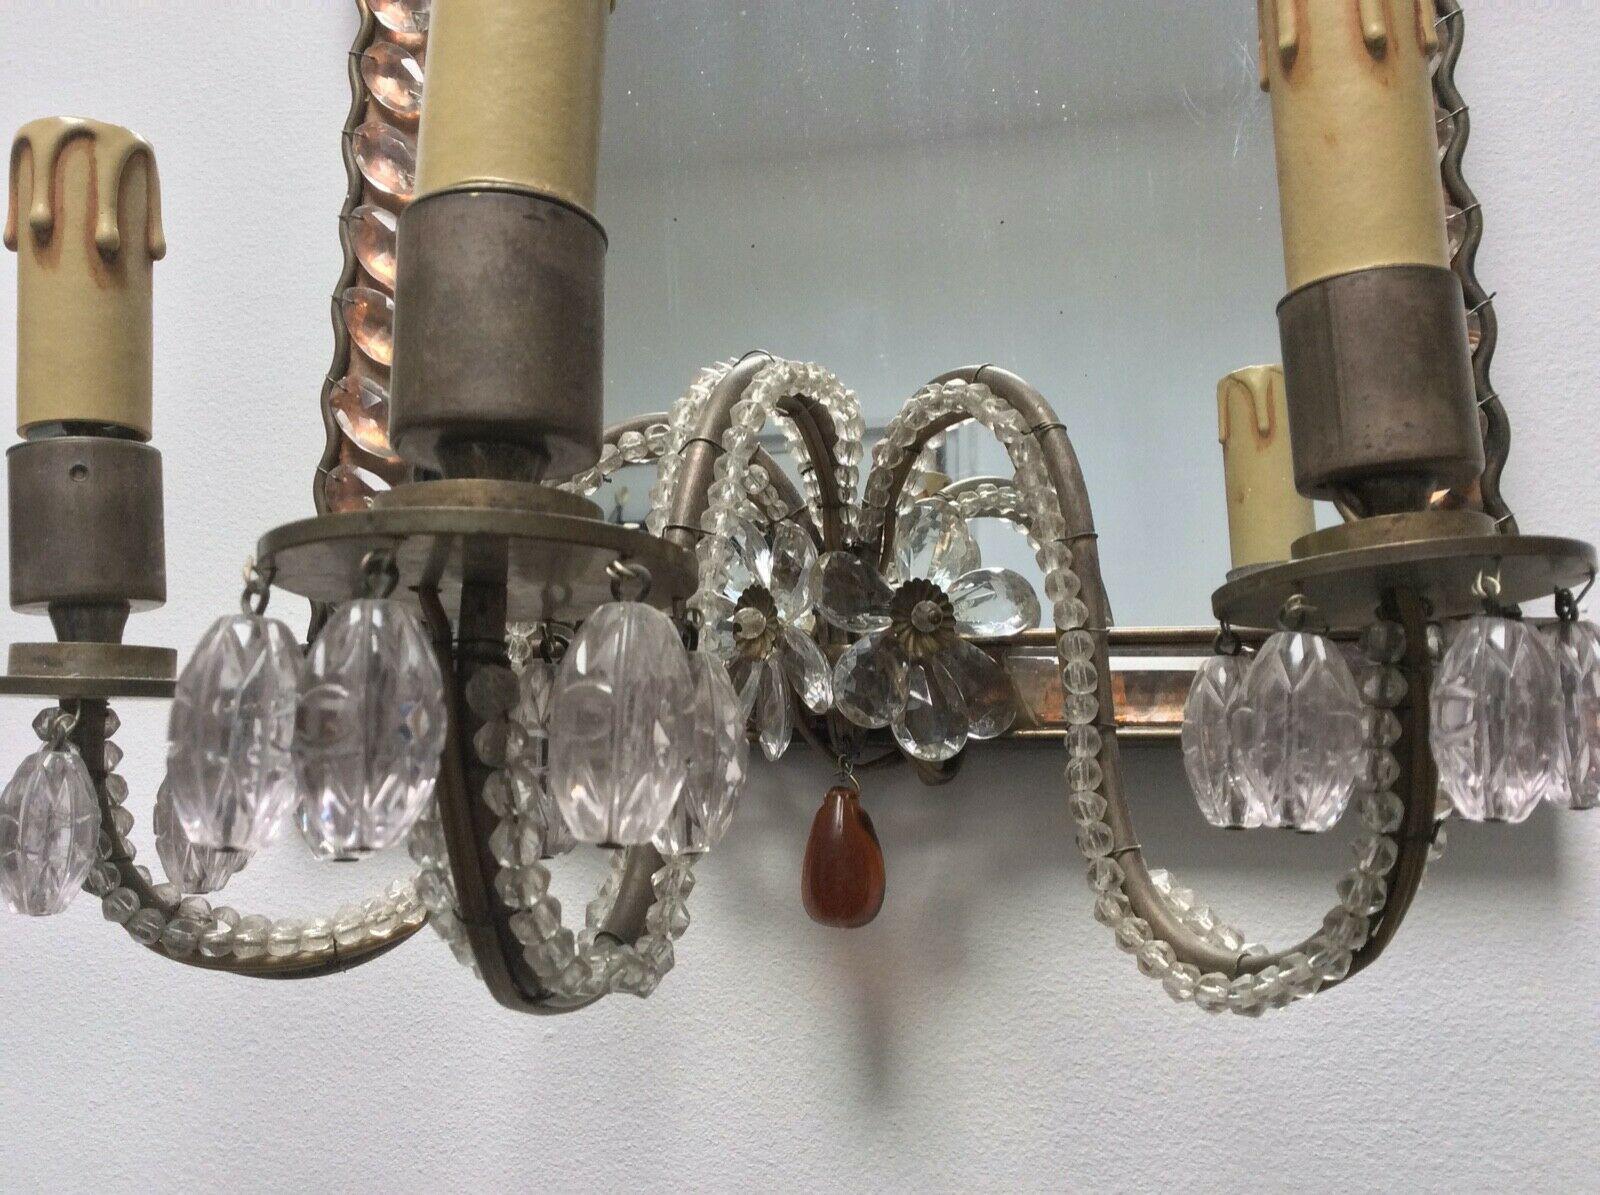 Rare 1920s French Art Deco Crystal Maison Bagues Wall Mirror Sconce / Wall Lamp For Sale 1